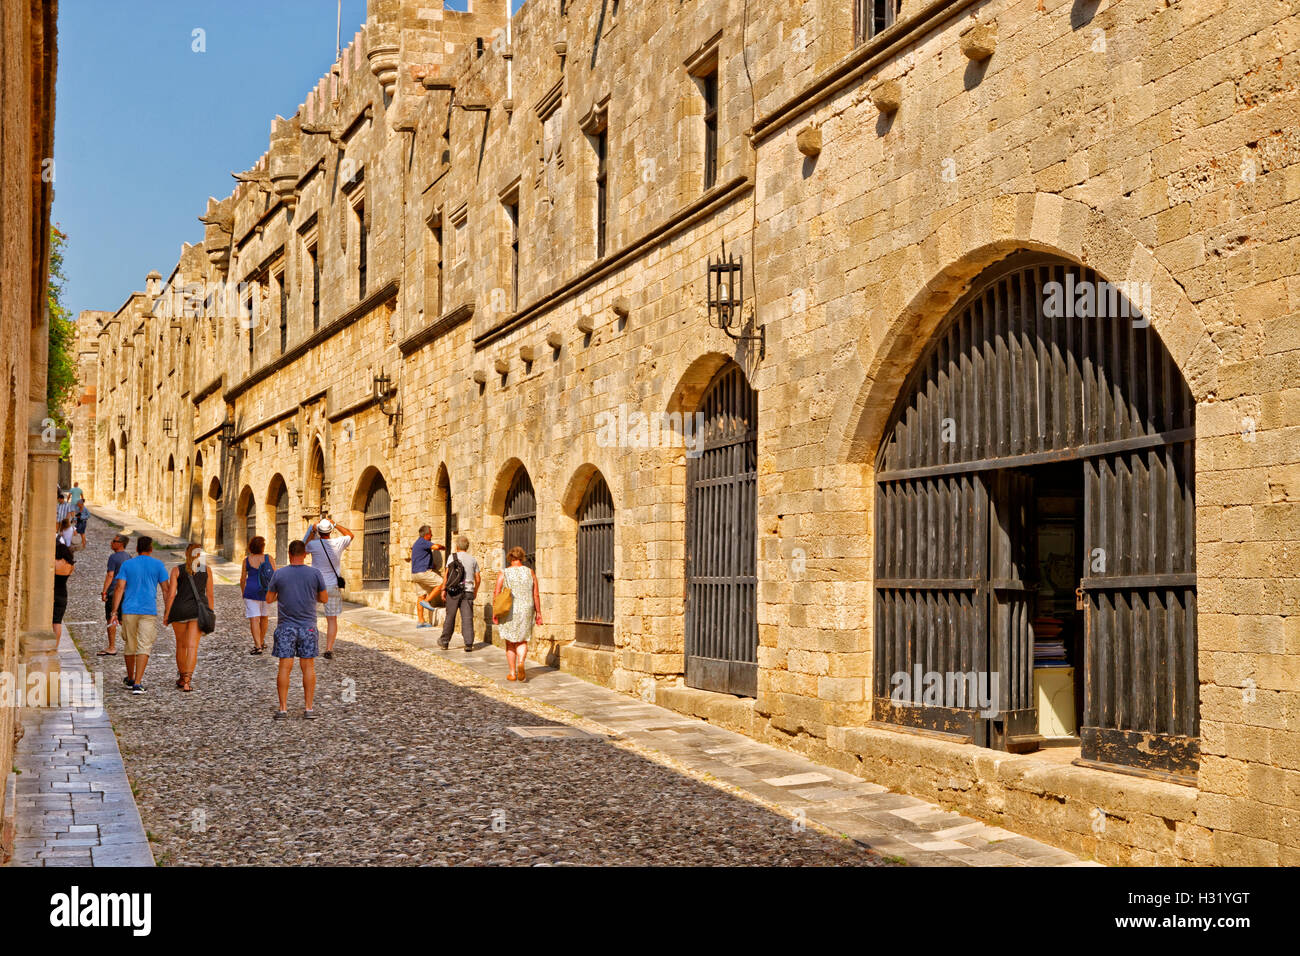 Avenue of the Knights, Rhodes Old Town, Rhodes Island, Dodecanese Island Group, Greece. Stock Photo